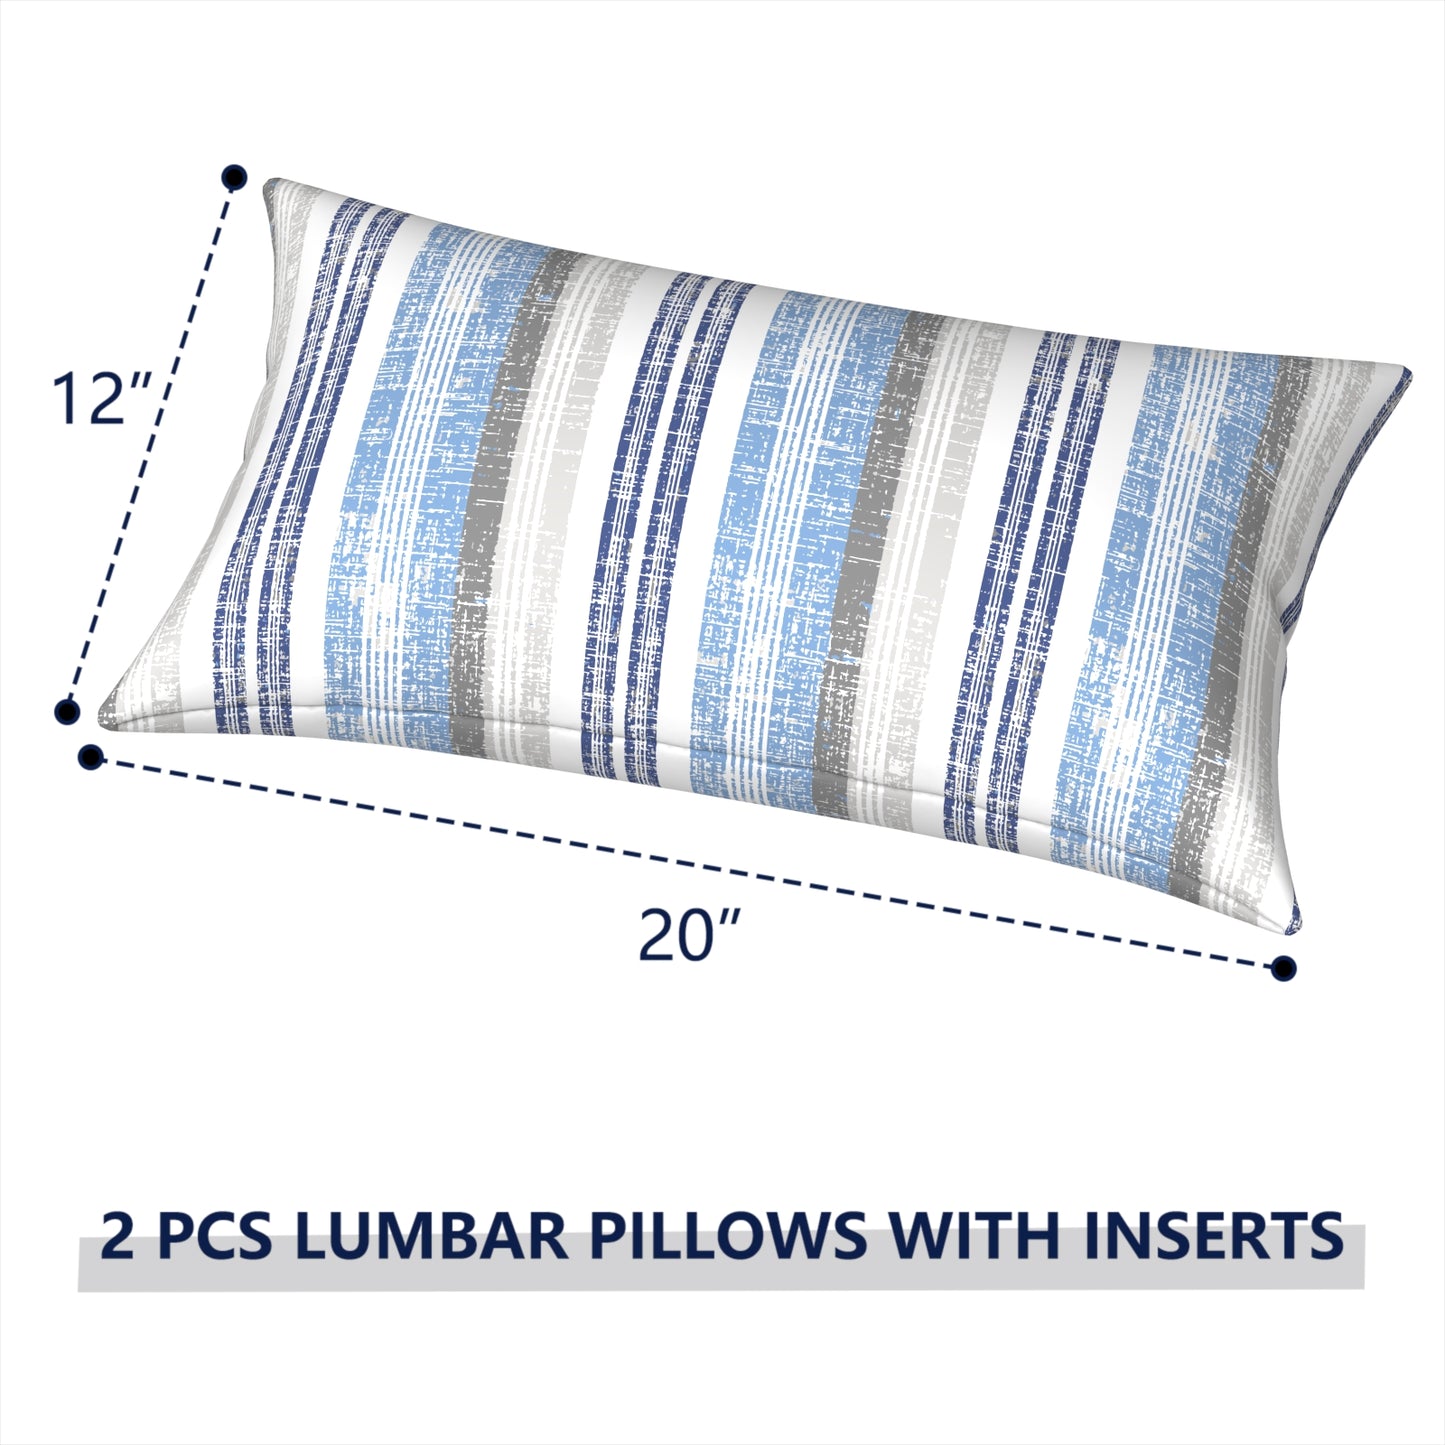 Melody Elephant Outdoor/Indoor Lumbar Pillows, Water Repellent Cushion Pillows, 12x20 Inch, Outdoor Pillows with Inserts for Home Garden, Pack of 2, Stripe Layered Blue